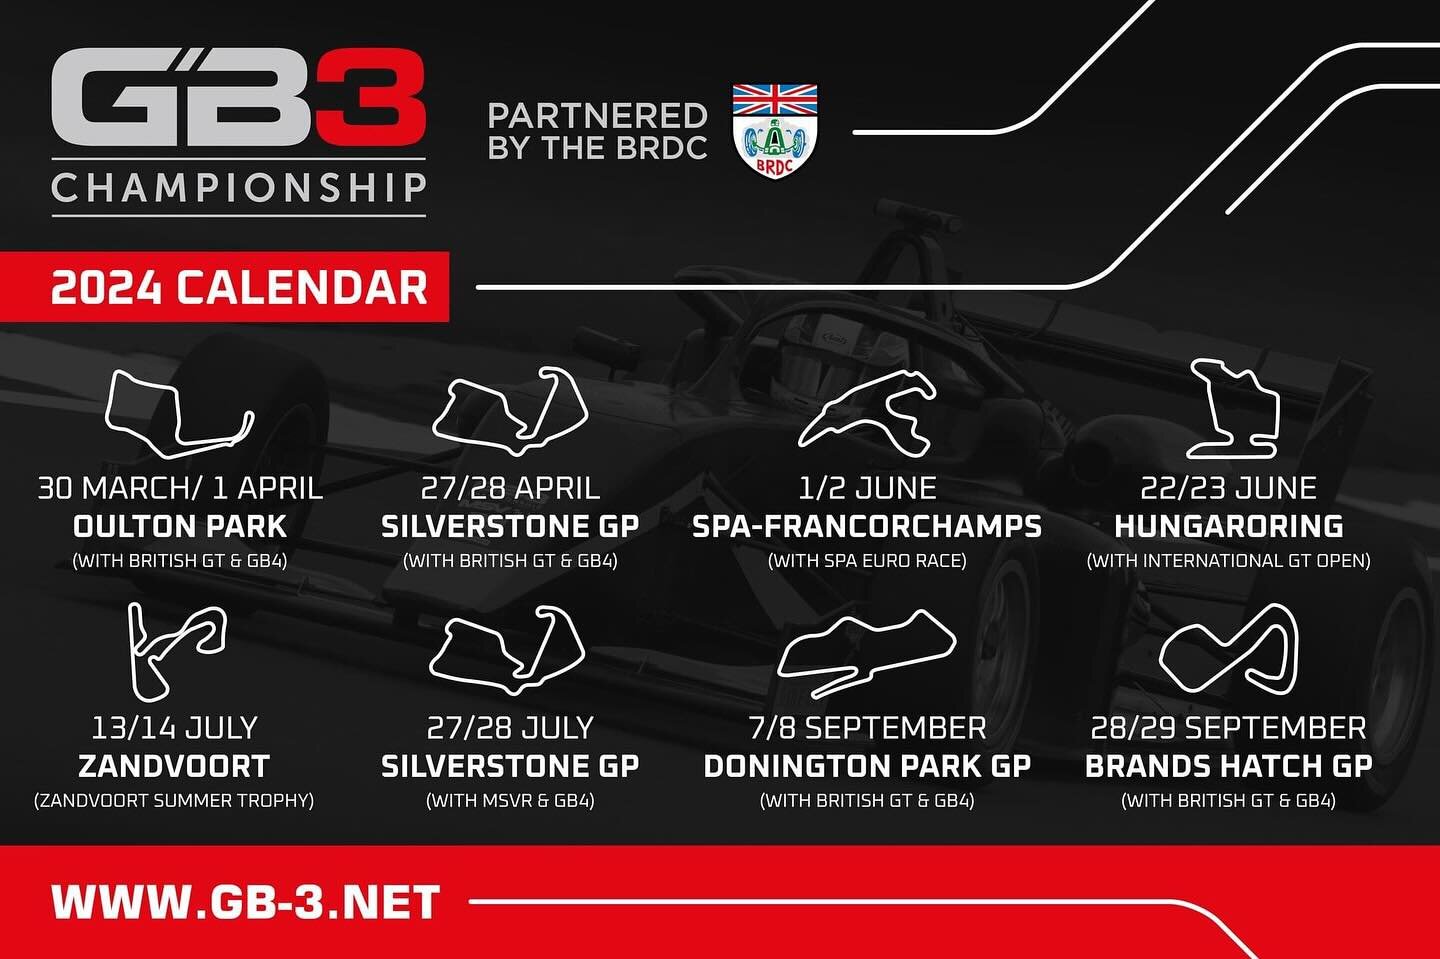 The GB3 calendar is absolutely awesome this year, we can&rsquo;t wait!
&bull;
#gb3 #gb3team #gb3championship #racing #motorsport #motorsportuk #ukmotorsport #singleseaters #carracing #cars #racing #racetrack #drivers